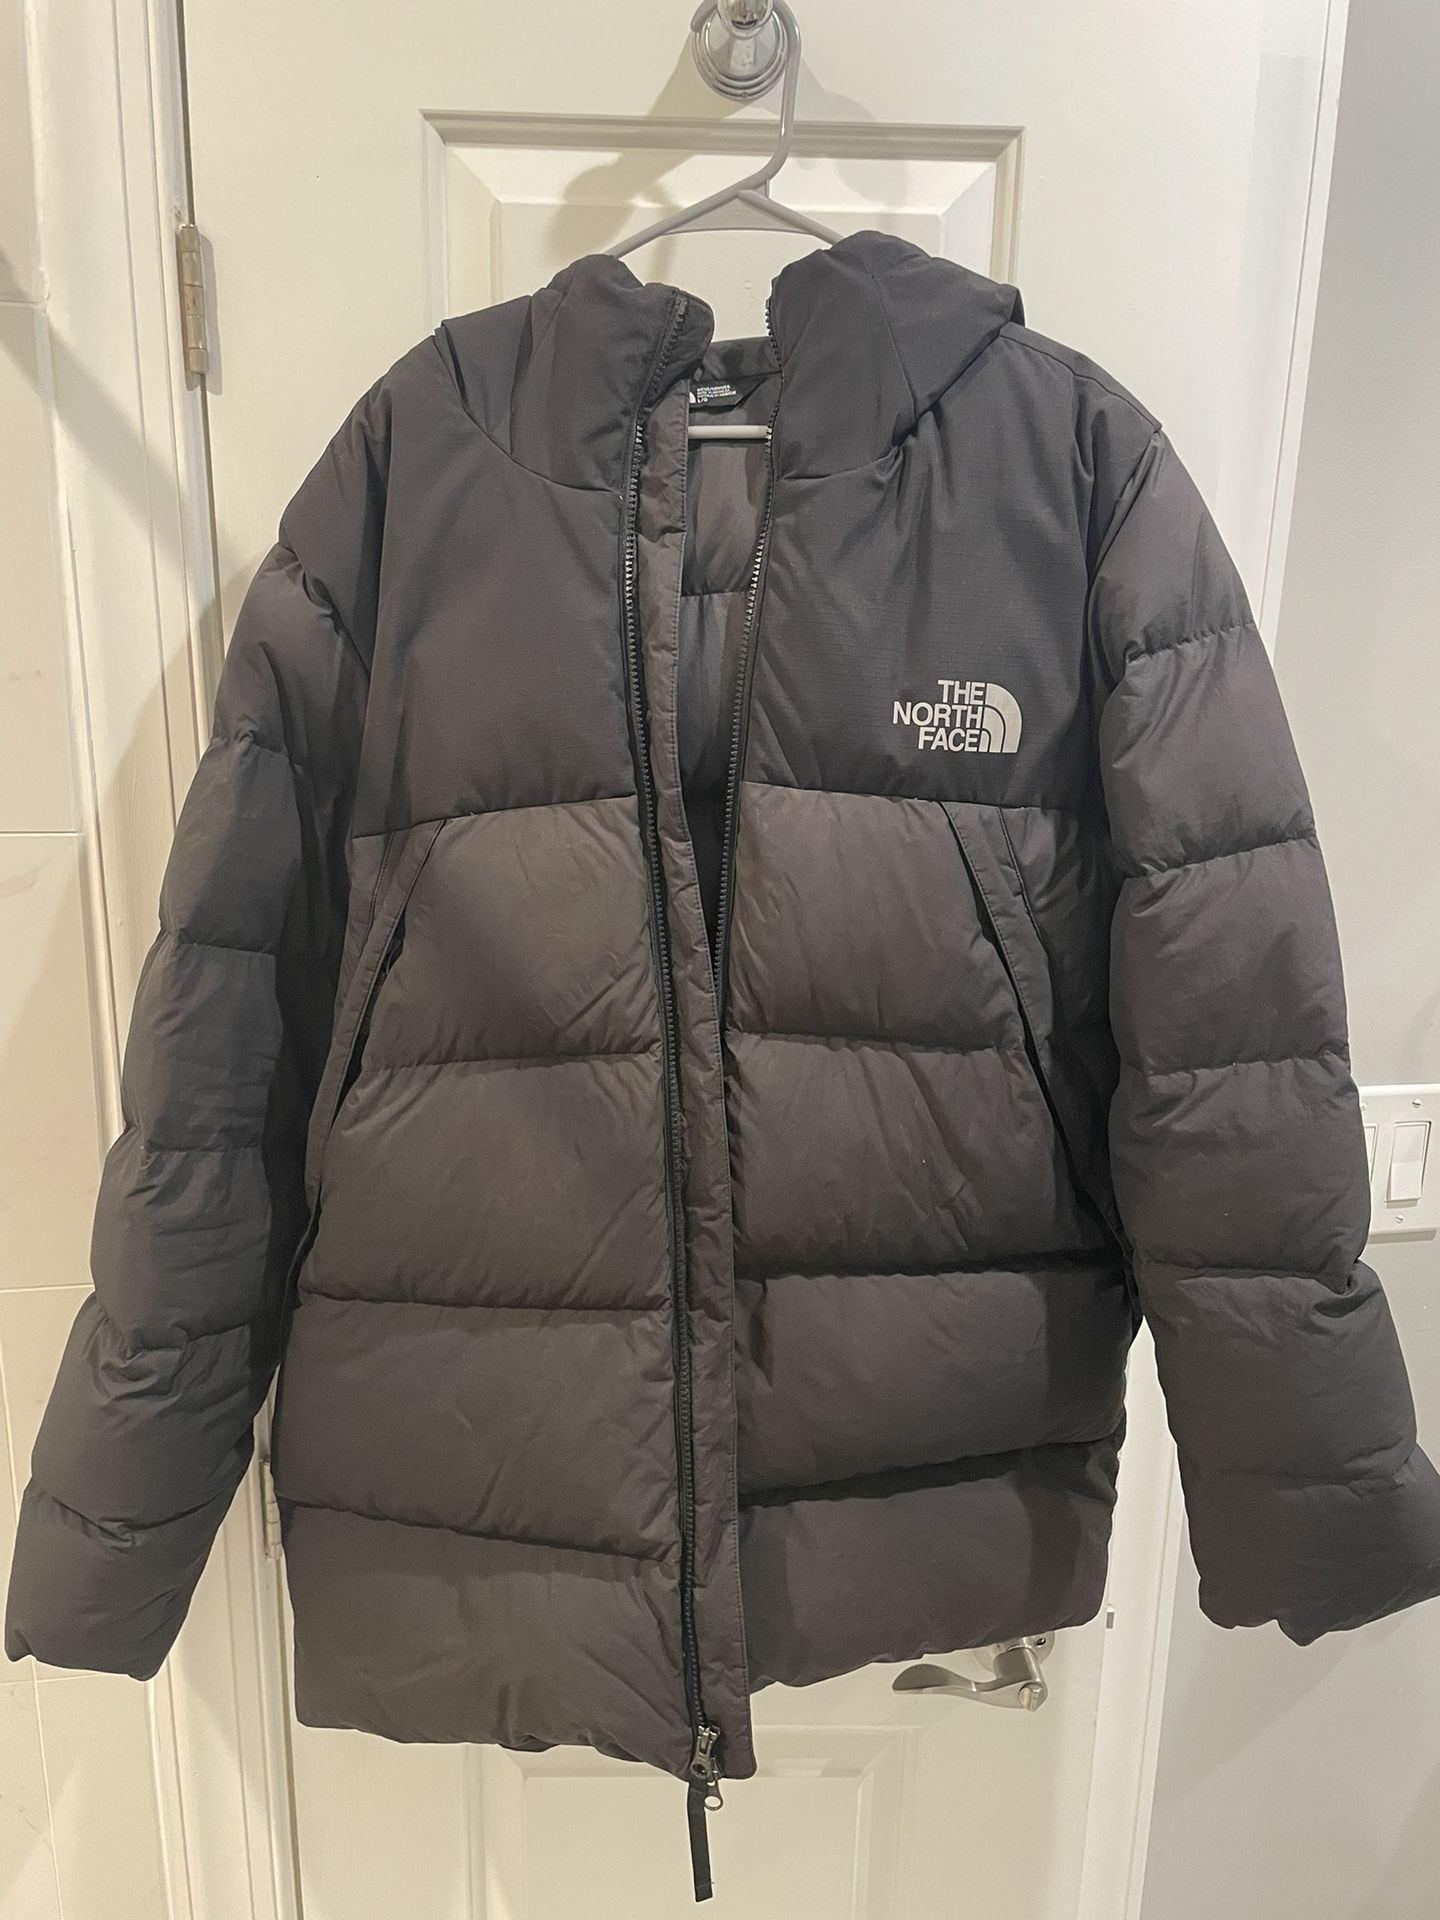 North Face Puffer Jacket Size L